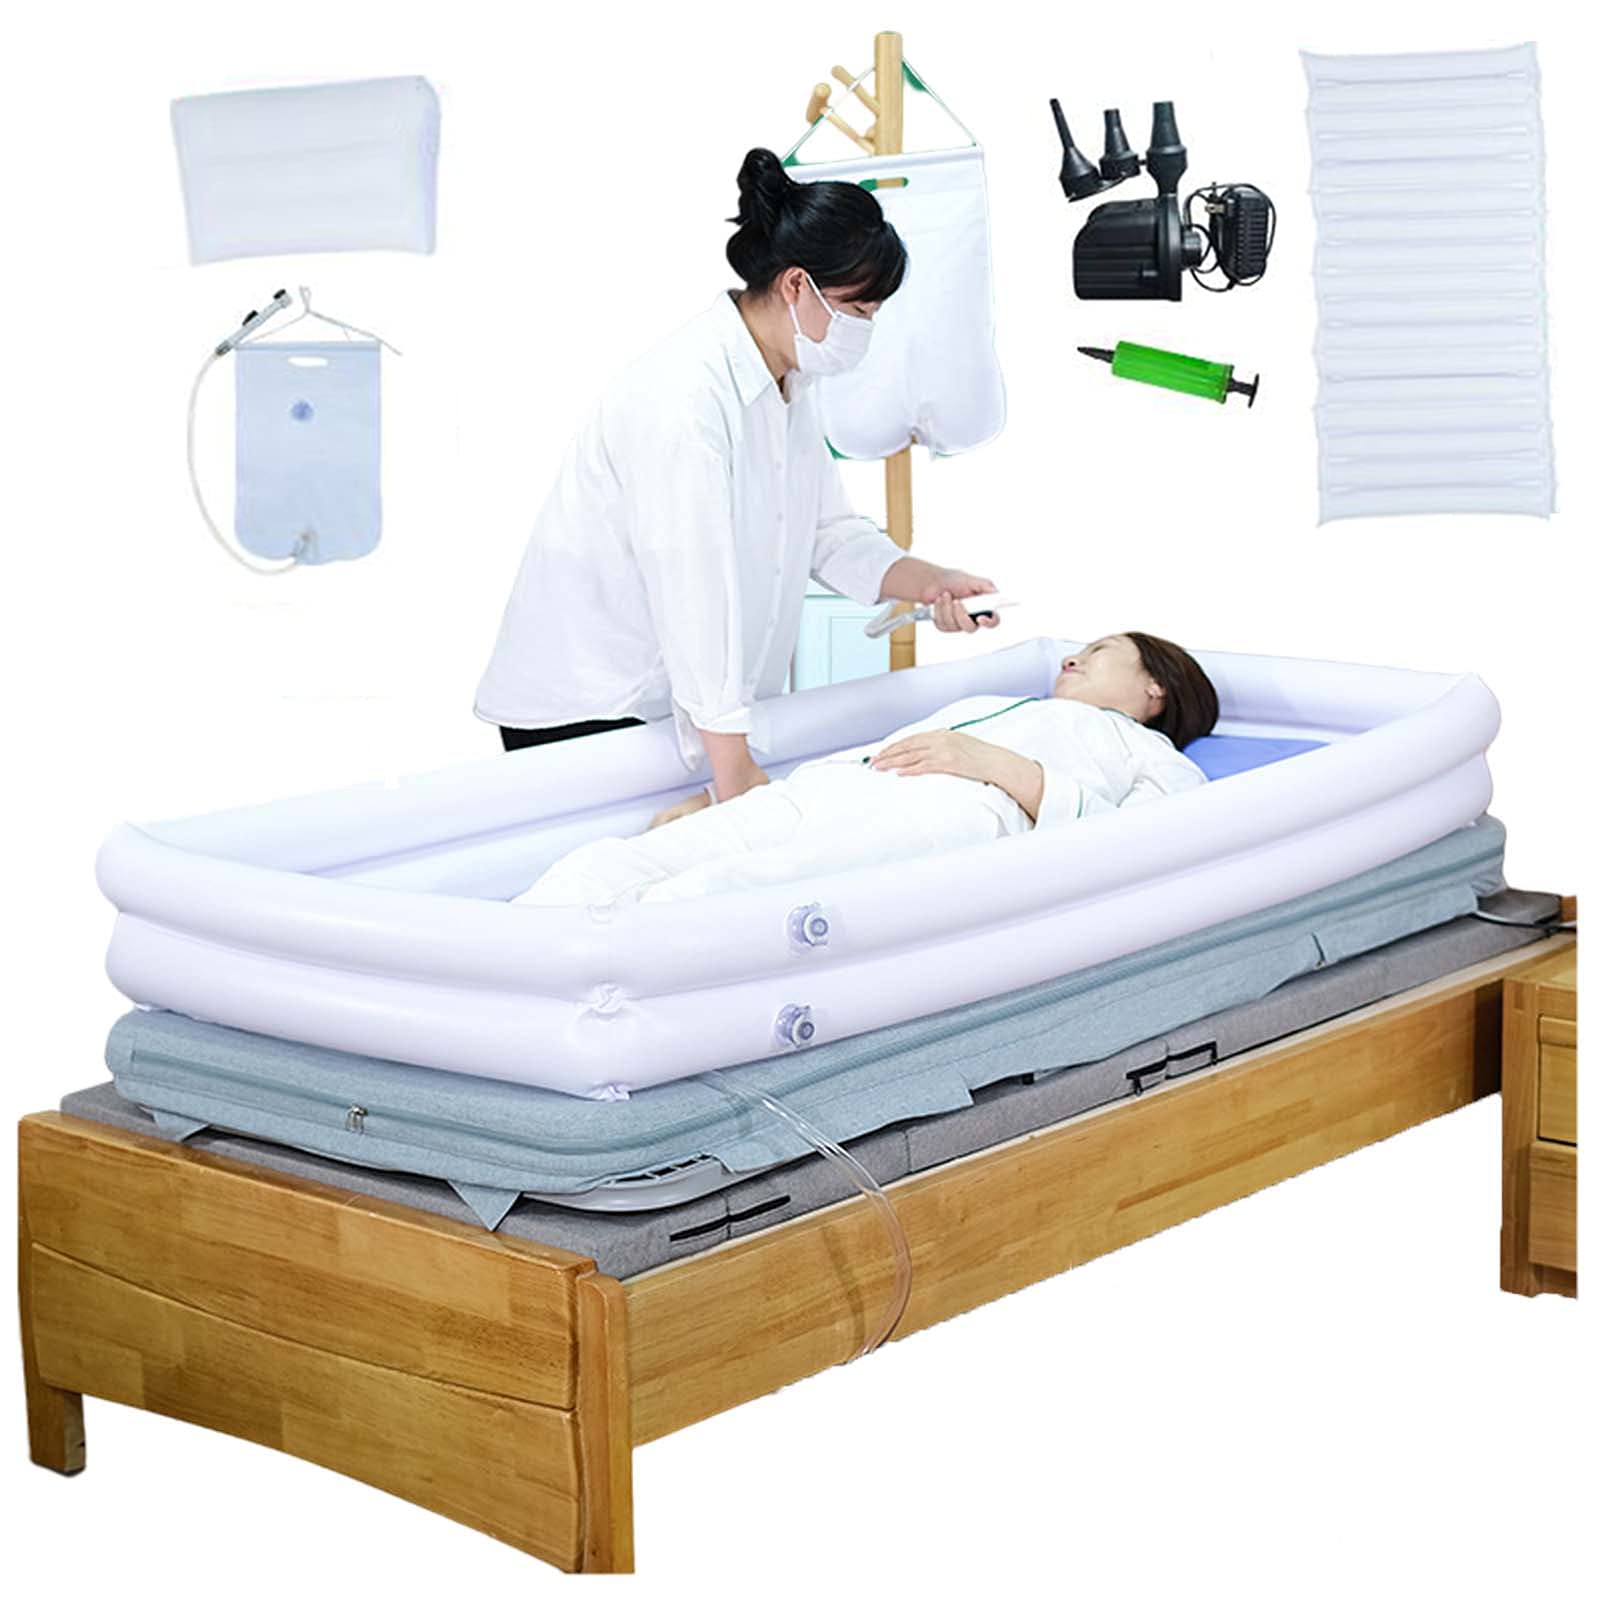 PAYRFV Inflatable Bathtub, Adult PVC Bathtub, Inflatable Bedside Shower Kit with Electric Air Pump and Water Bag, Wash Fullbody in Bed, Portable Bathtub for The Pregnant, Elderly, Disabled